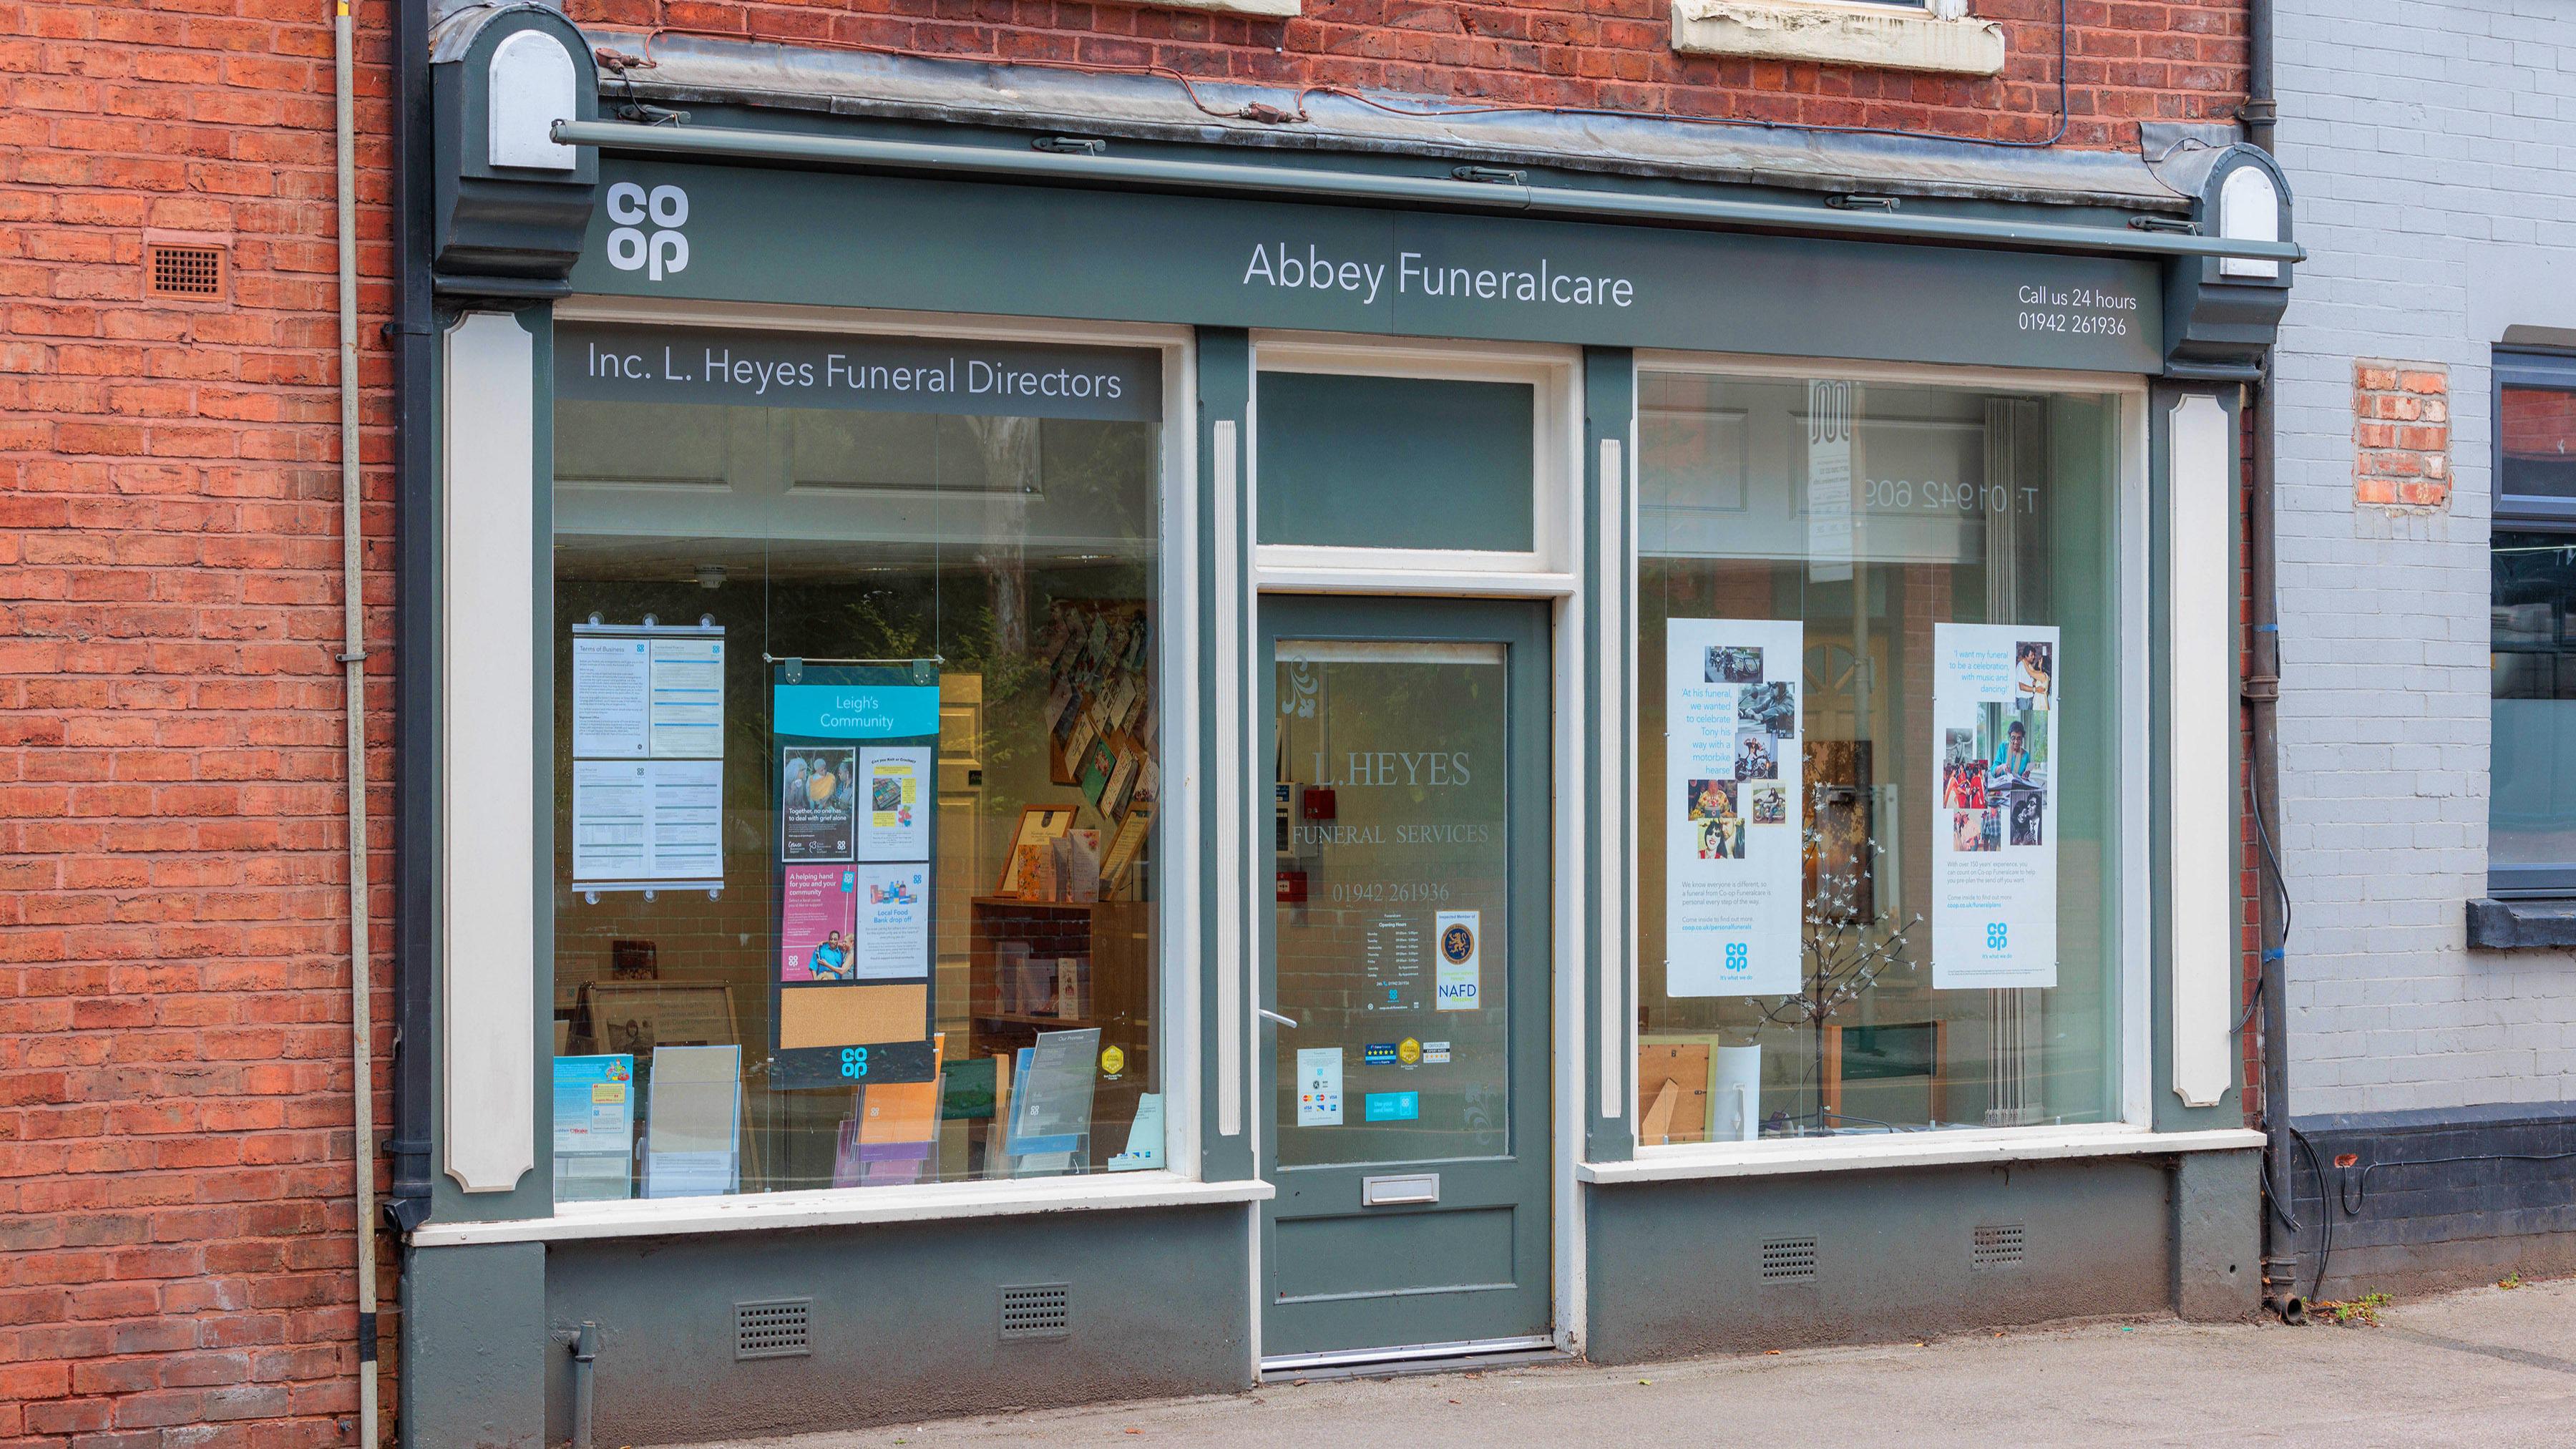 Abbey Funeralcare Leigh Abbey Funeralcare (inc. inc. L. Heyes) Leigh 01942 261936